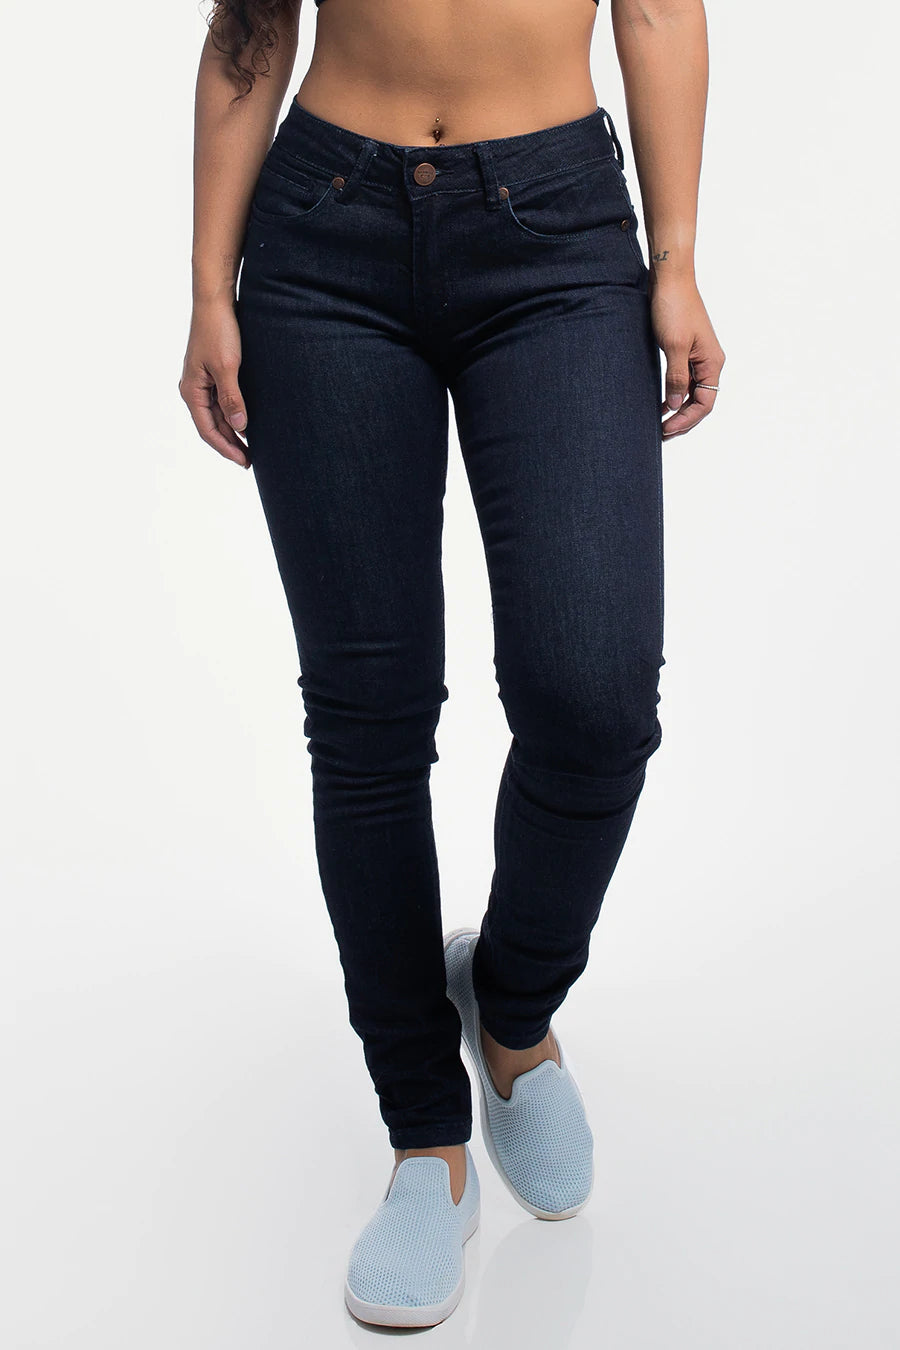 Womens Slim Athletic Fit Jeans